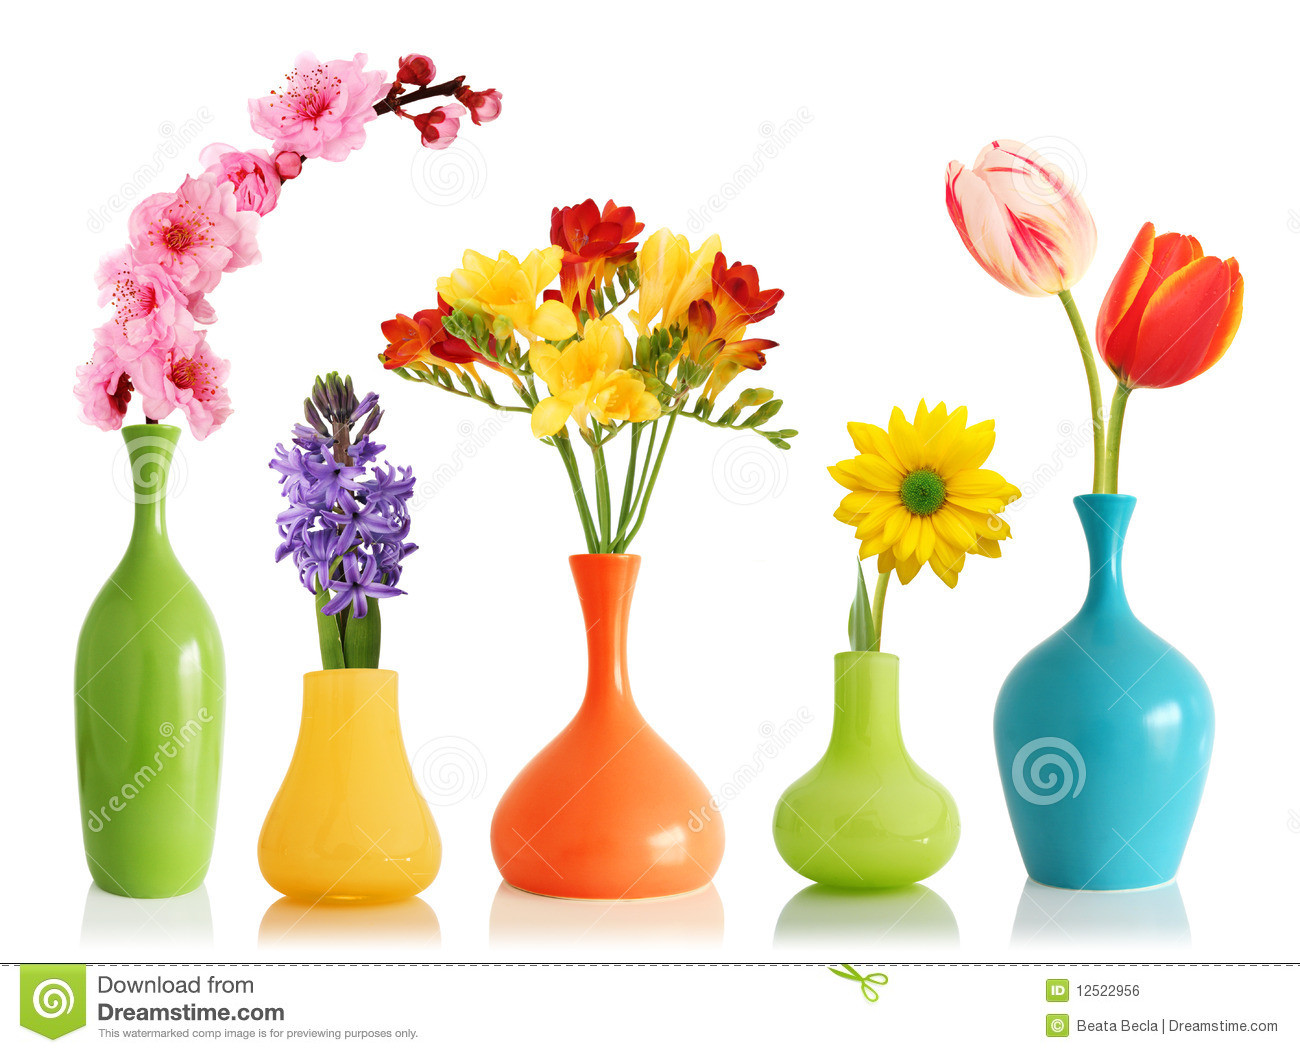 14 Awesome Flowers In Small Glass Vases 2024 free download flowers in small glass vases of spring flowers in vases stock photo image of gerber 12522956 in spring flowers in vases